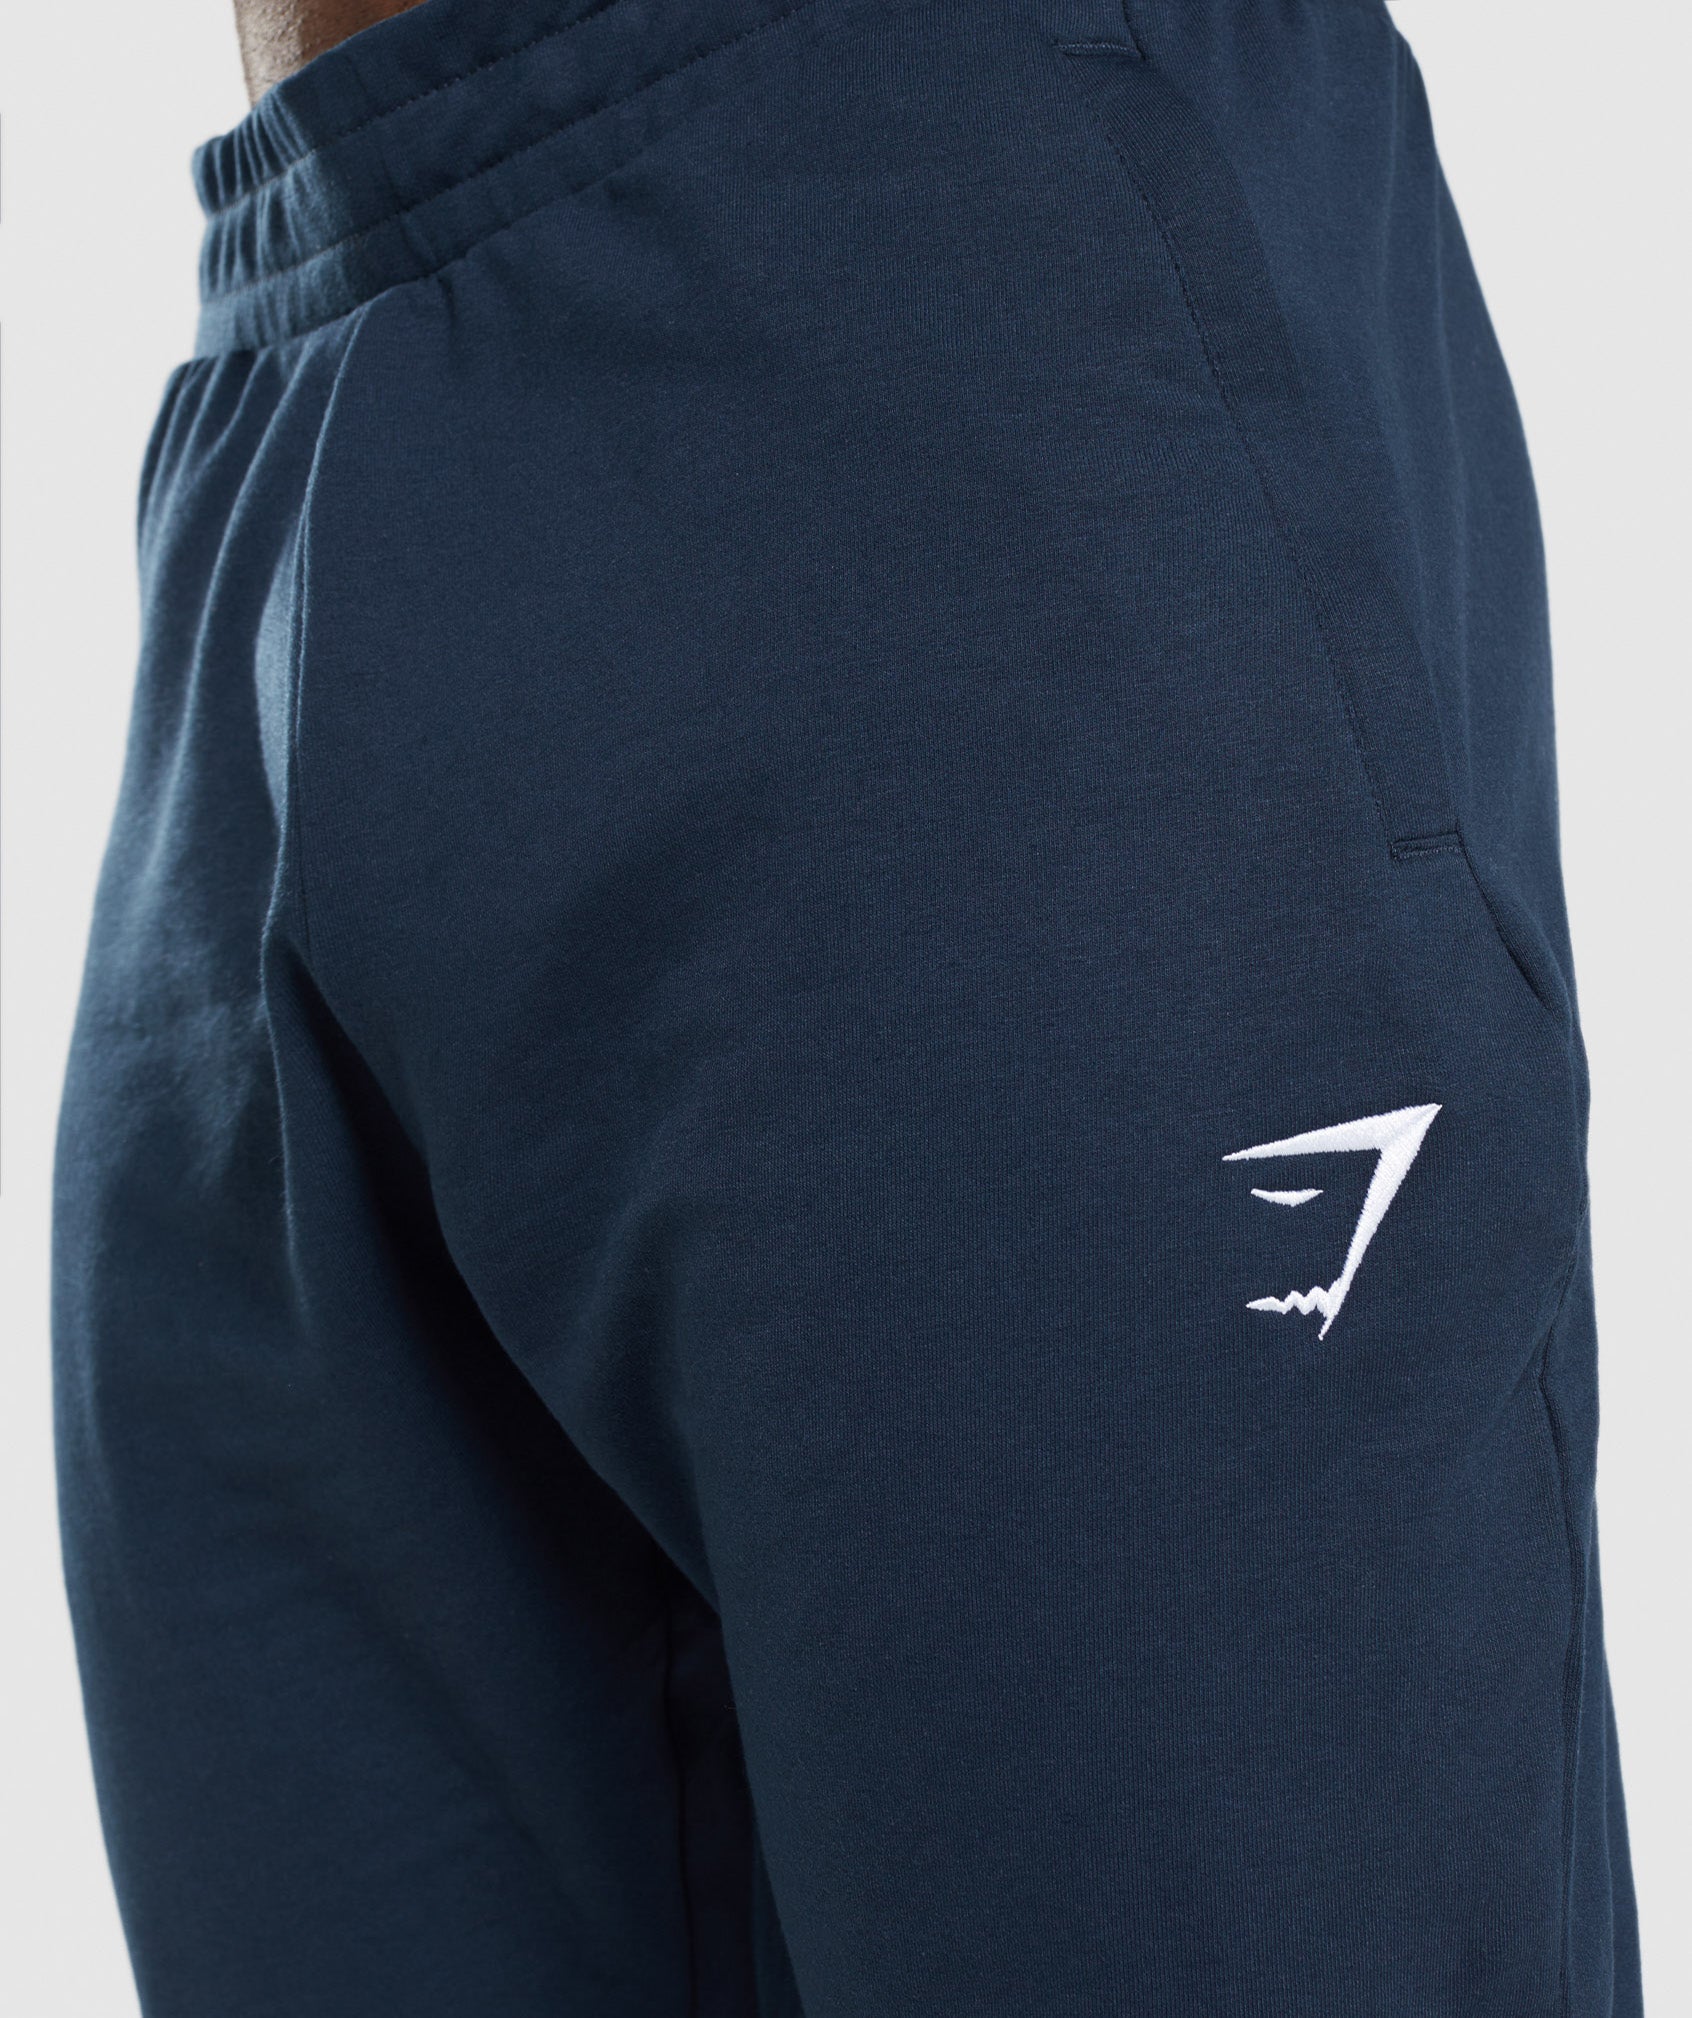 Critical Pant in Navy